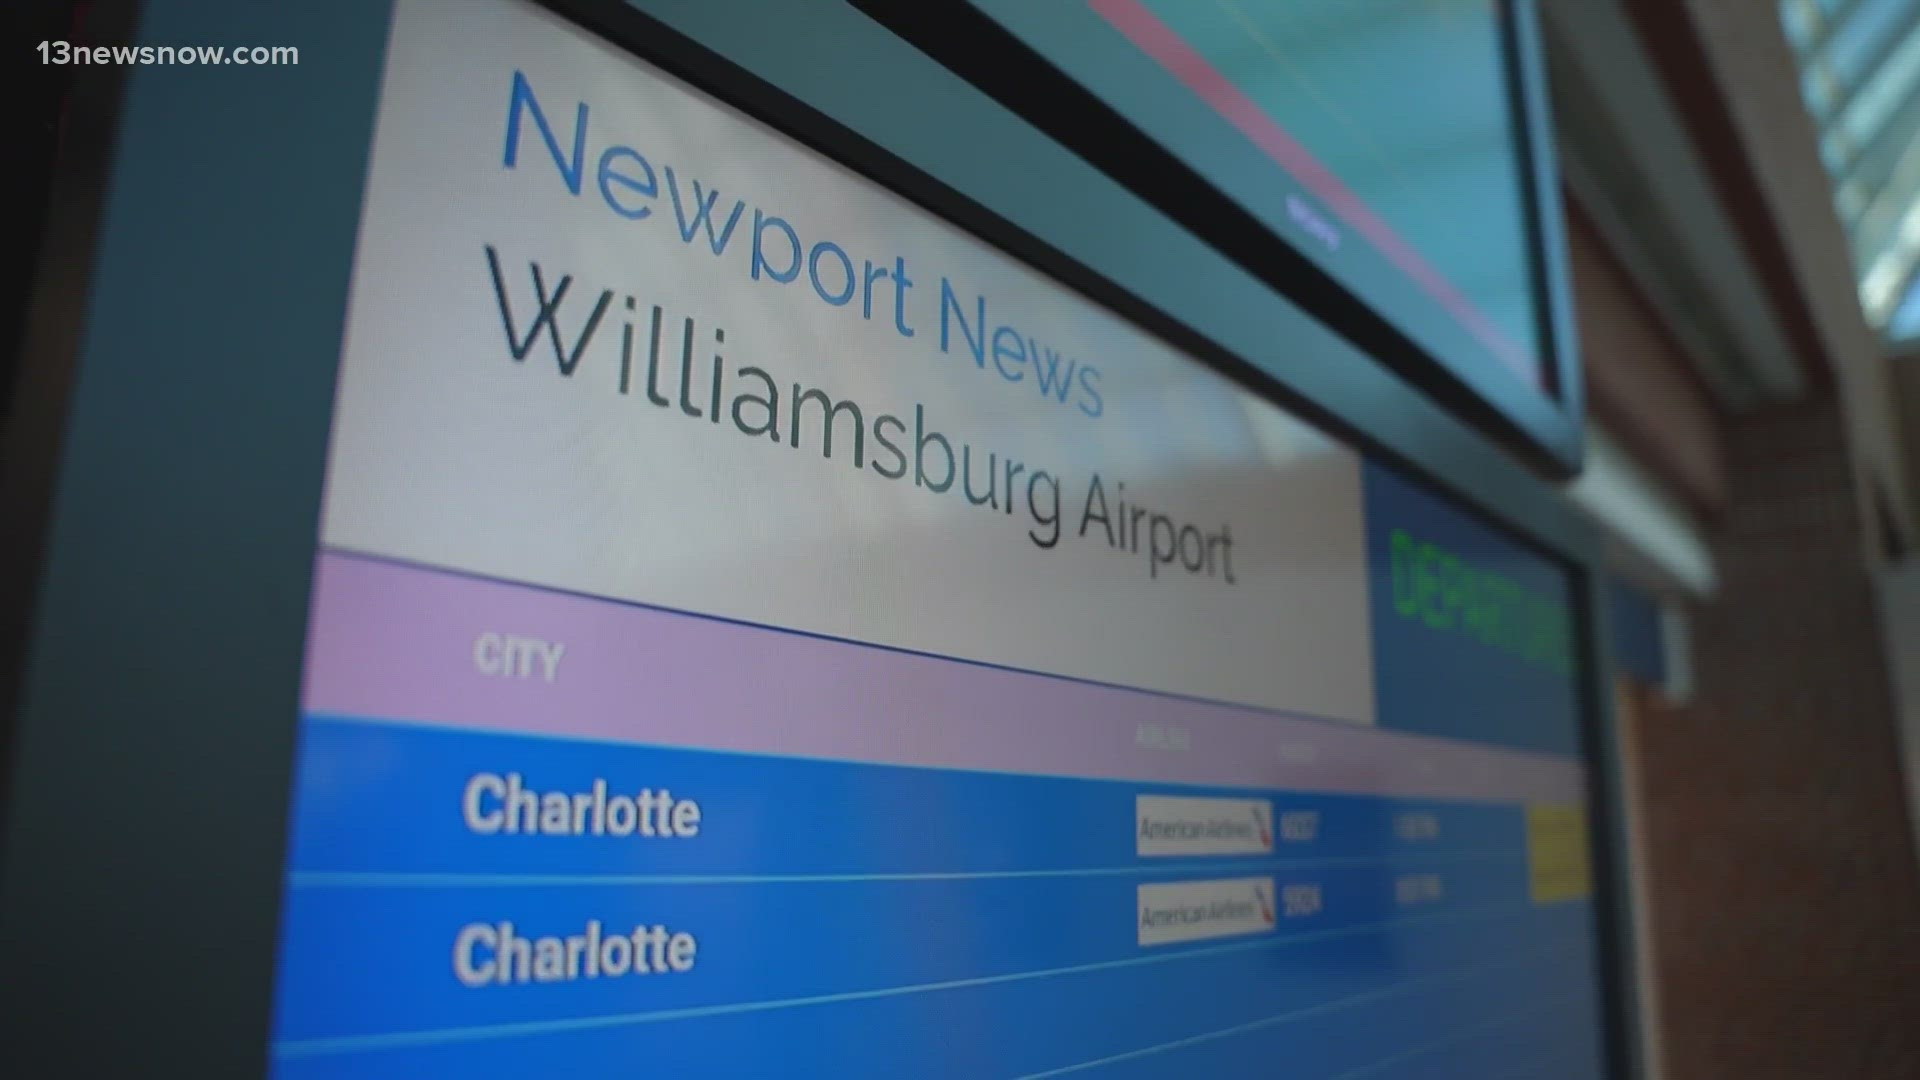 Leaders at Newport News-Williamsburg Airport are preparing for the future. The airport just got more than $1 million in federal funding.